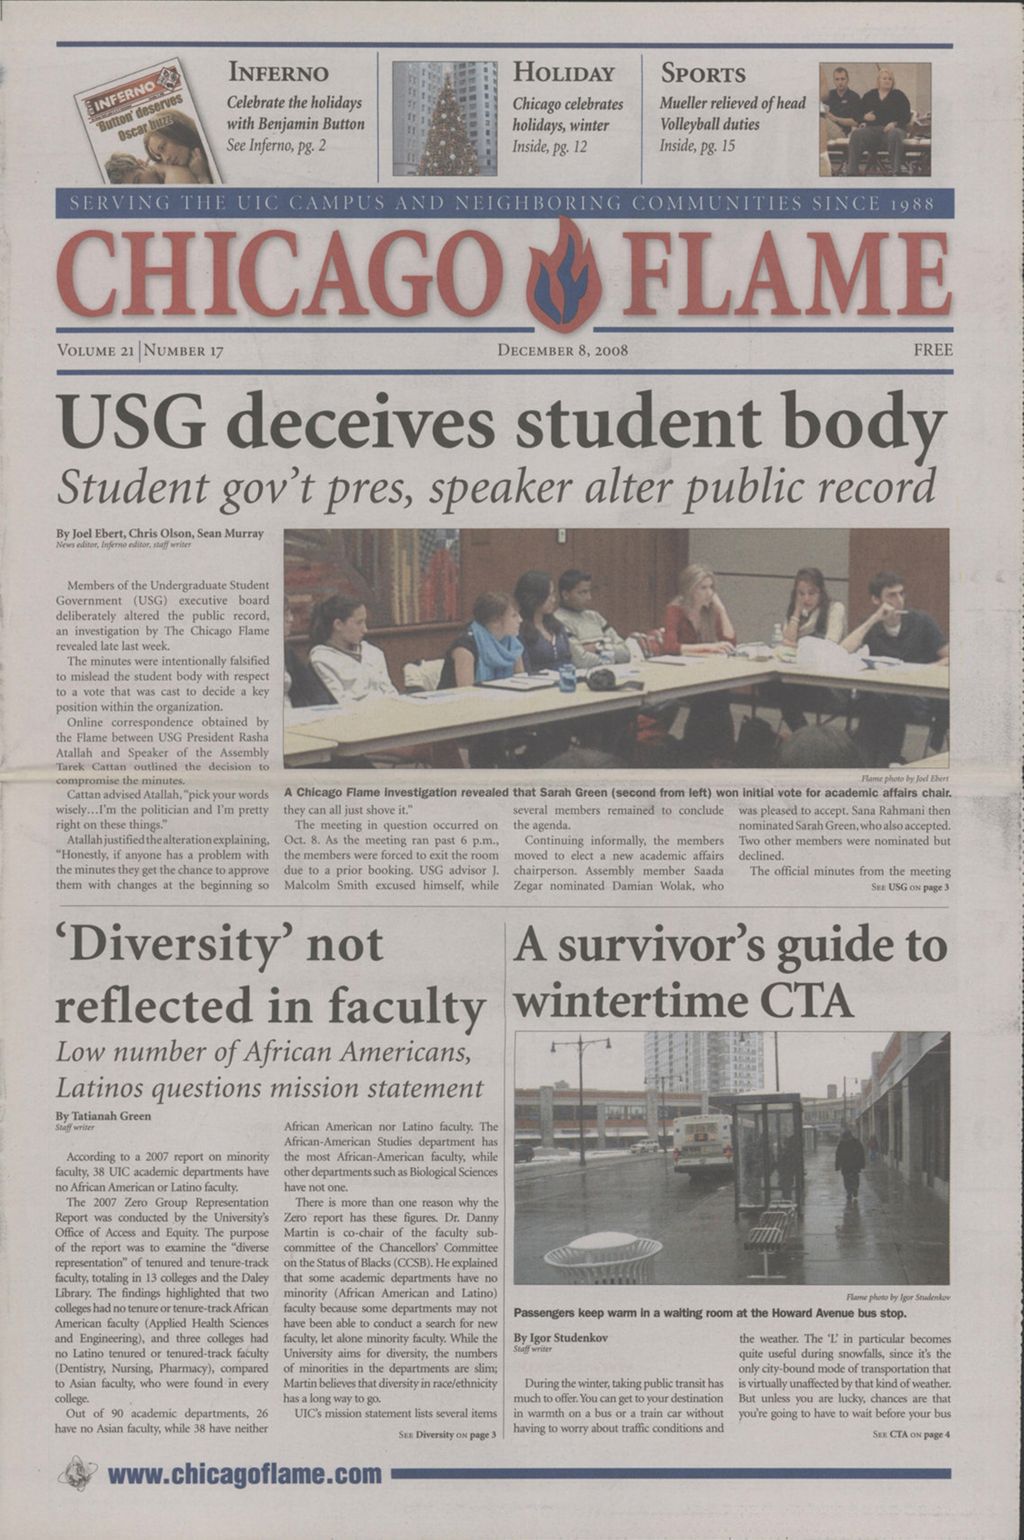 Miniature of Chicago Flame (December 8, 2008)